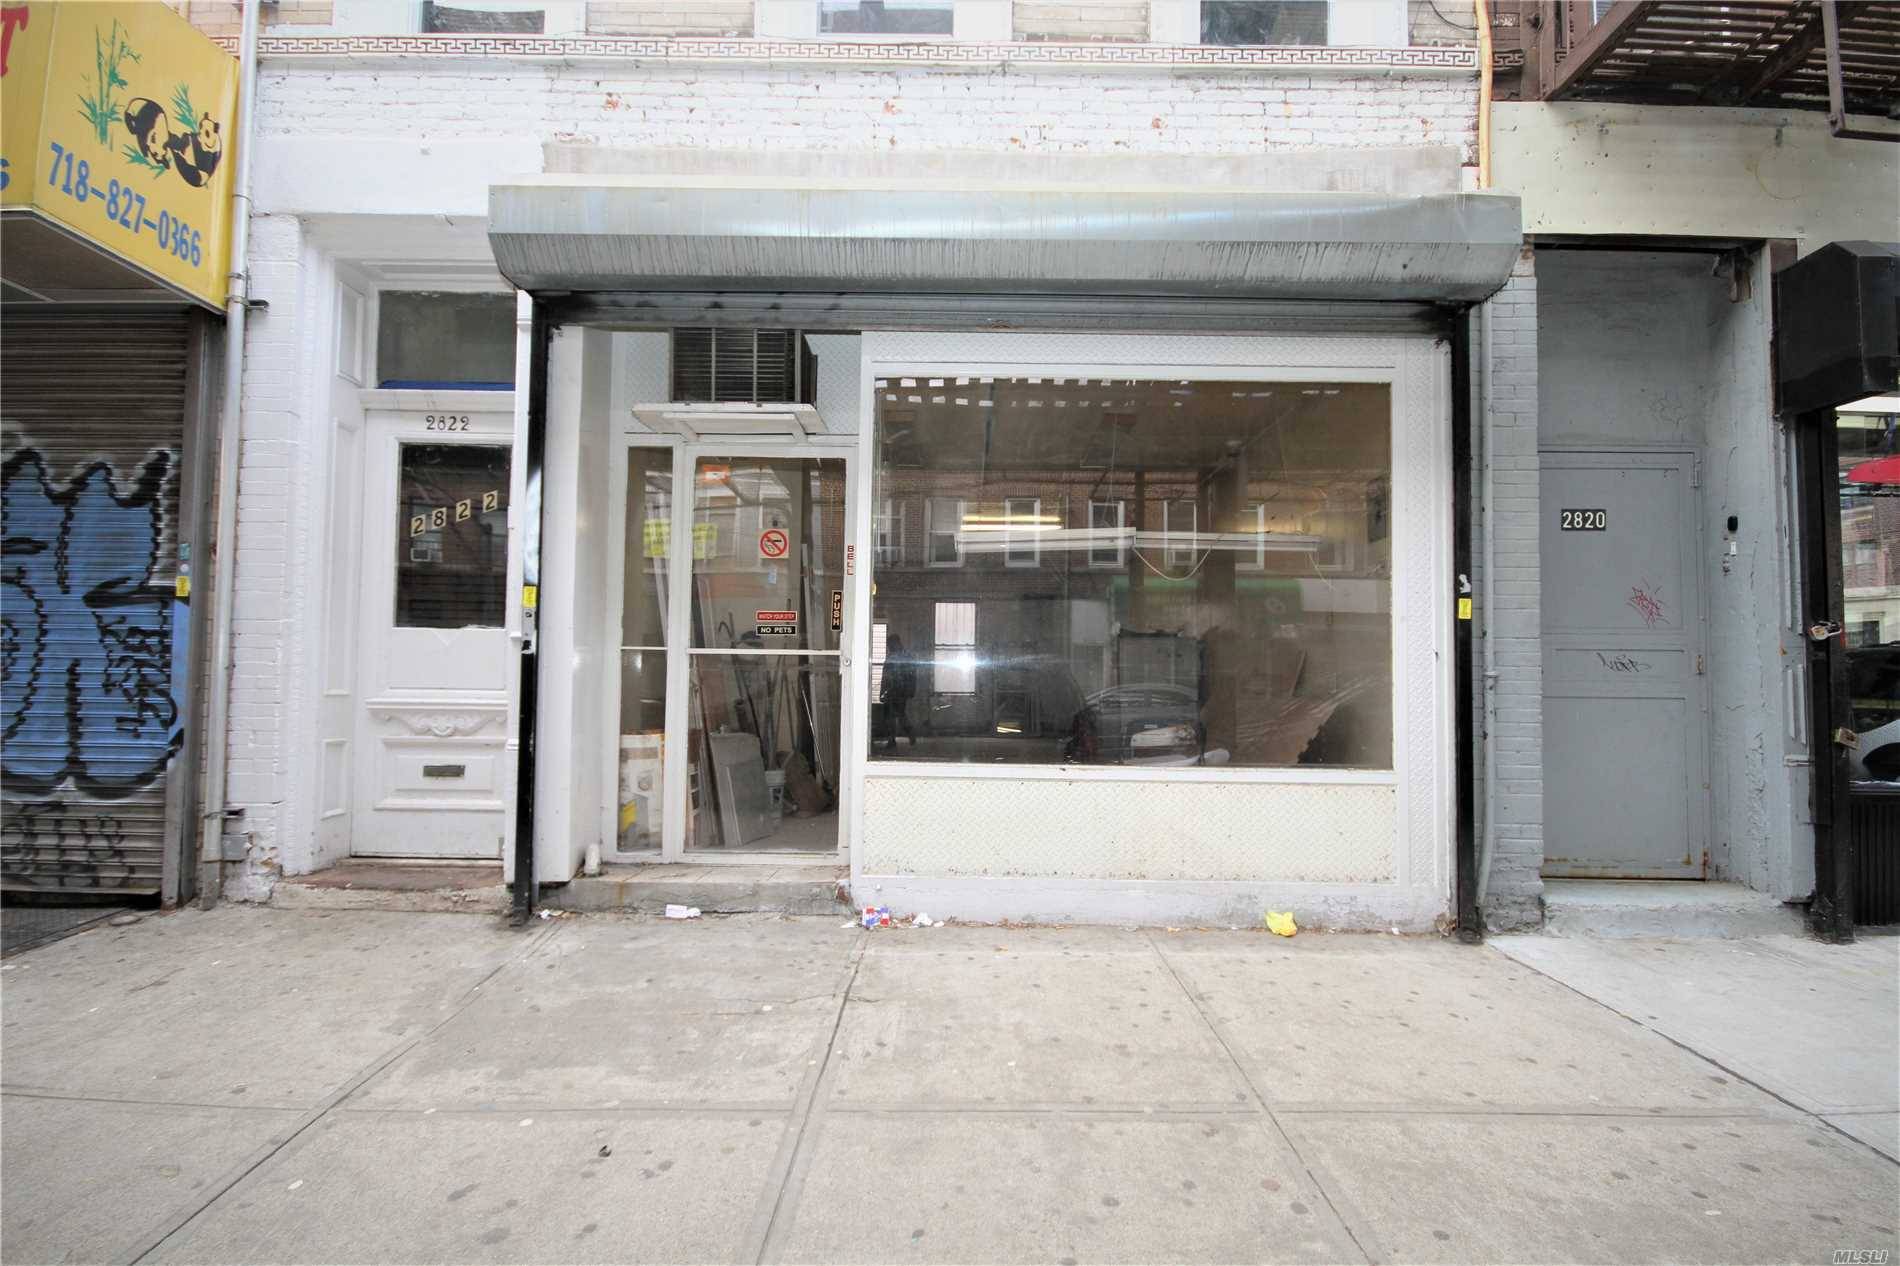 Commercial Store Front Available On Well Traveled Fulton Street 1 Block From The J/Z Train Station At Van Siclen Ave.